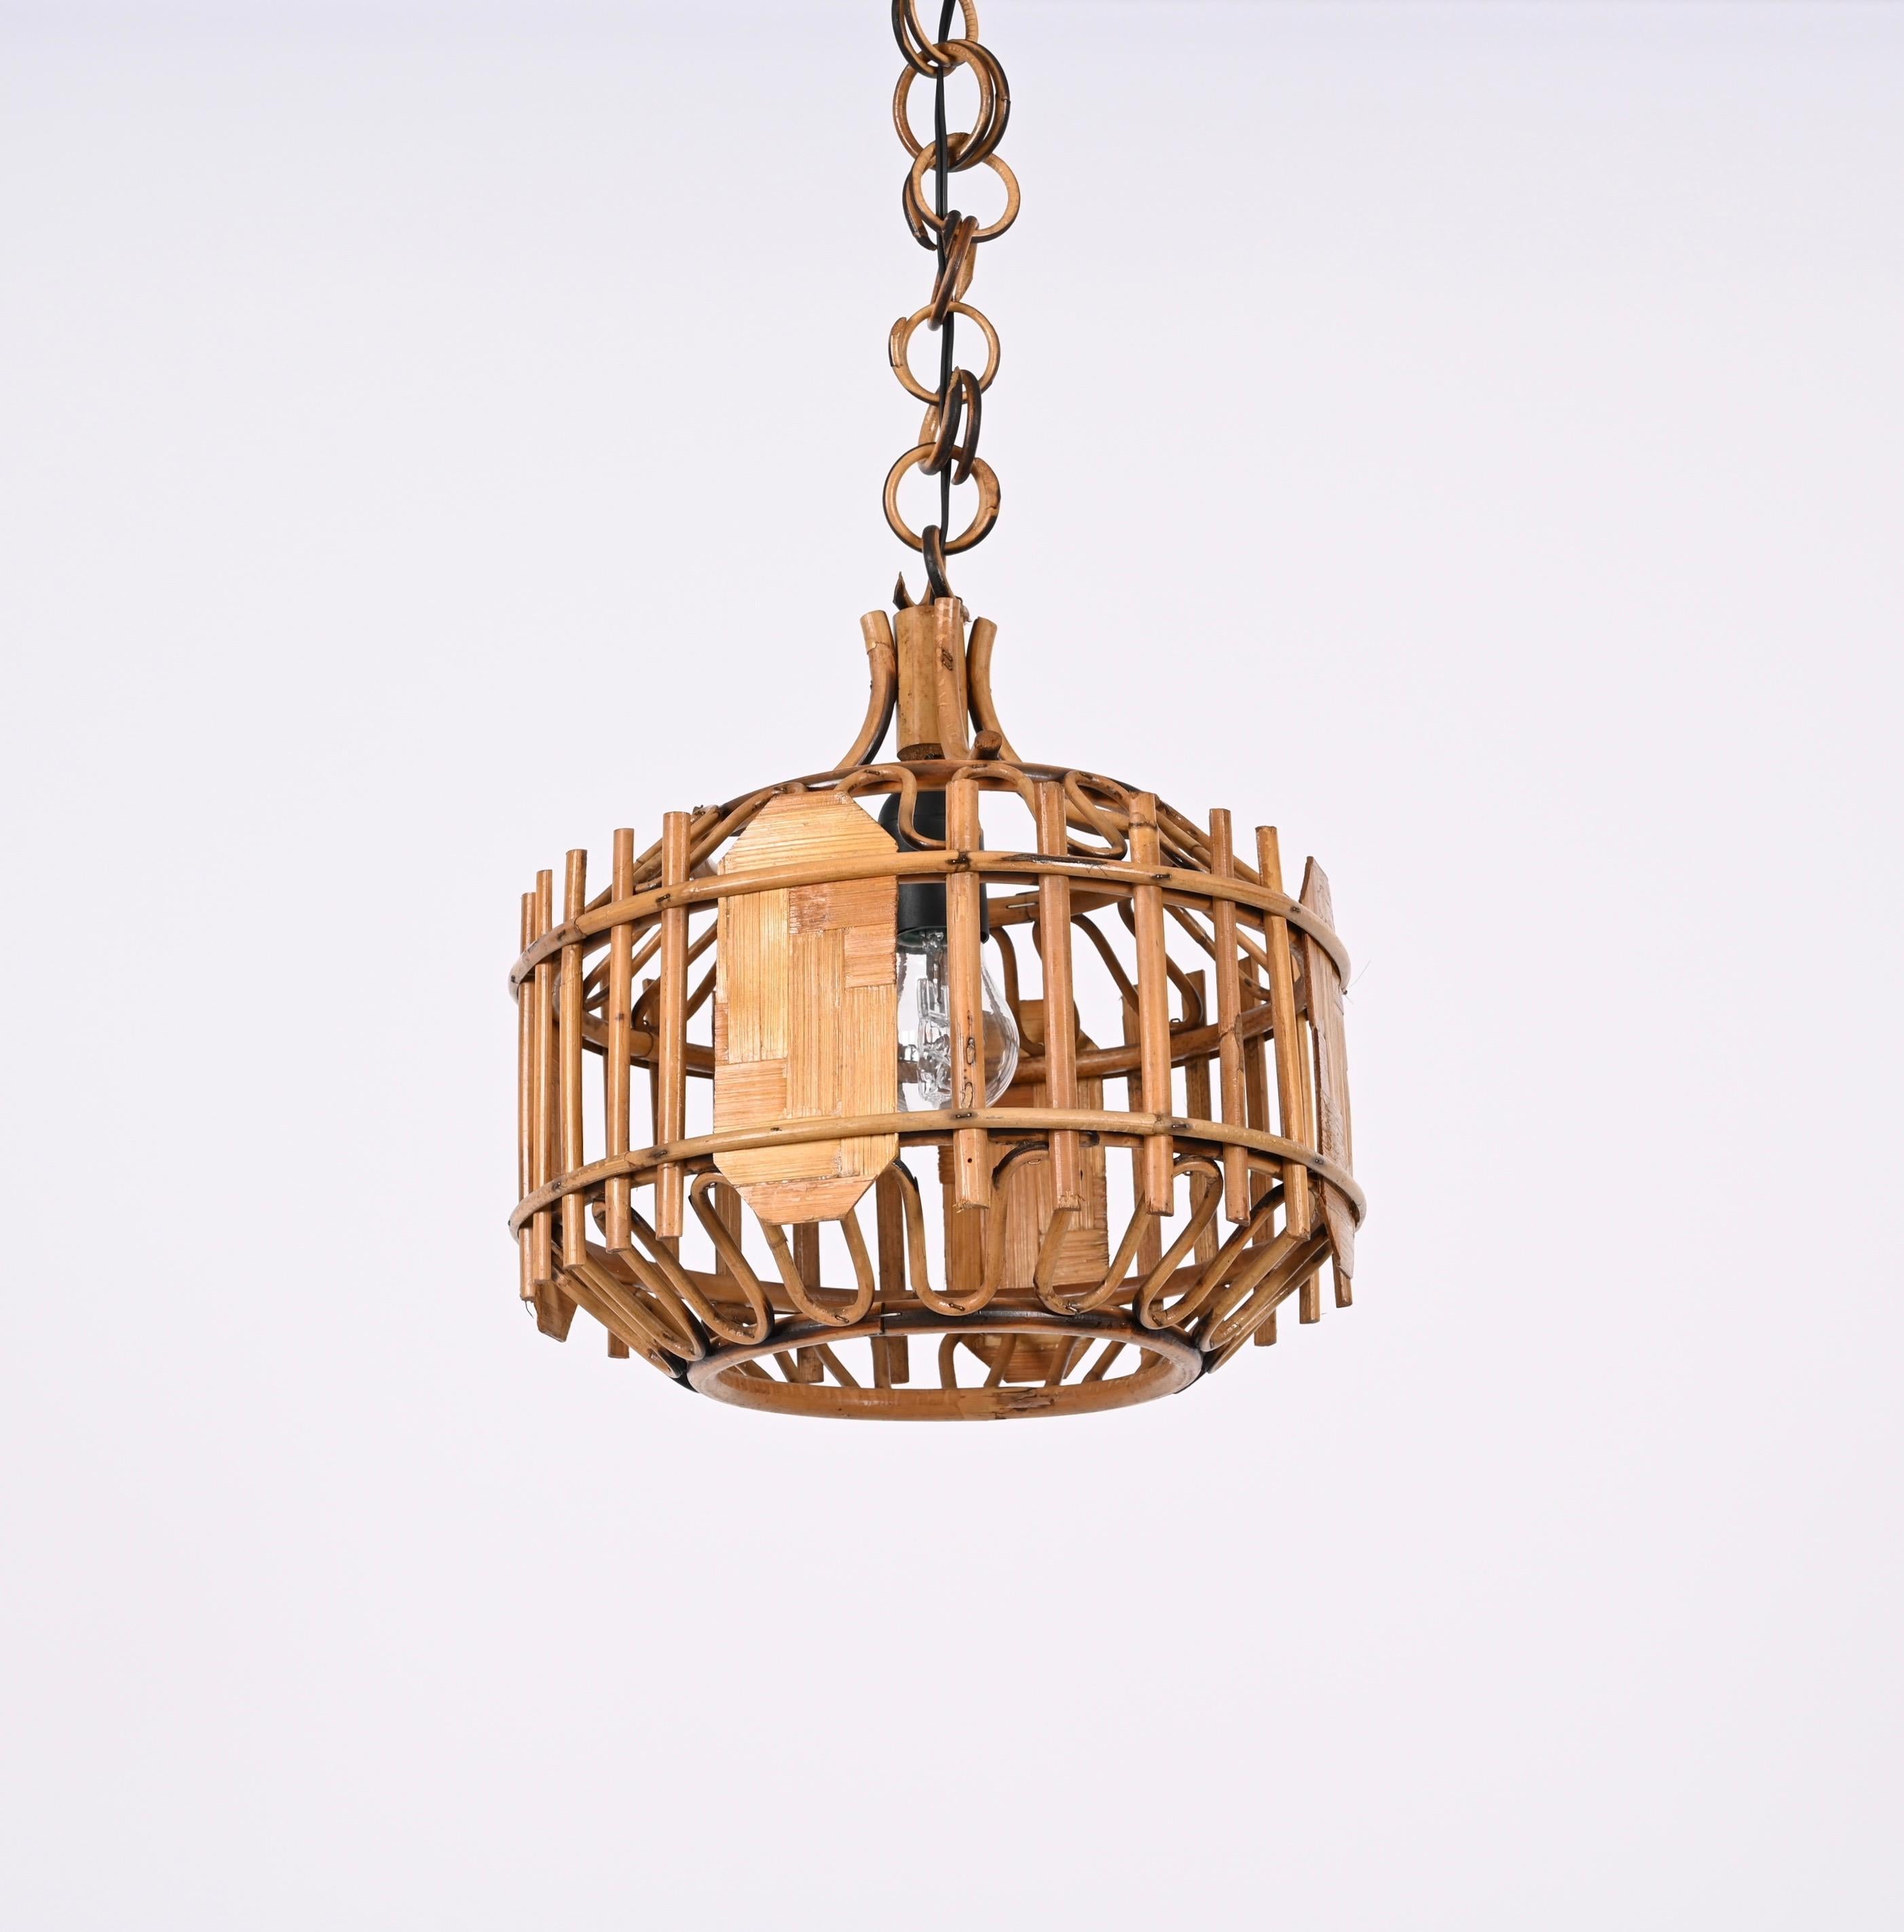 Midcentury French Riviera Bambo and Rattan Rounded Italian Chandelier, 1960s For Sale 6